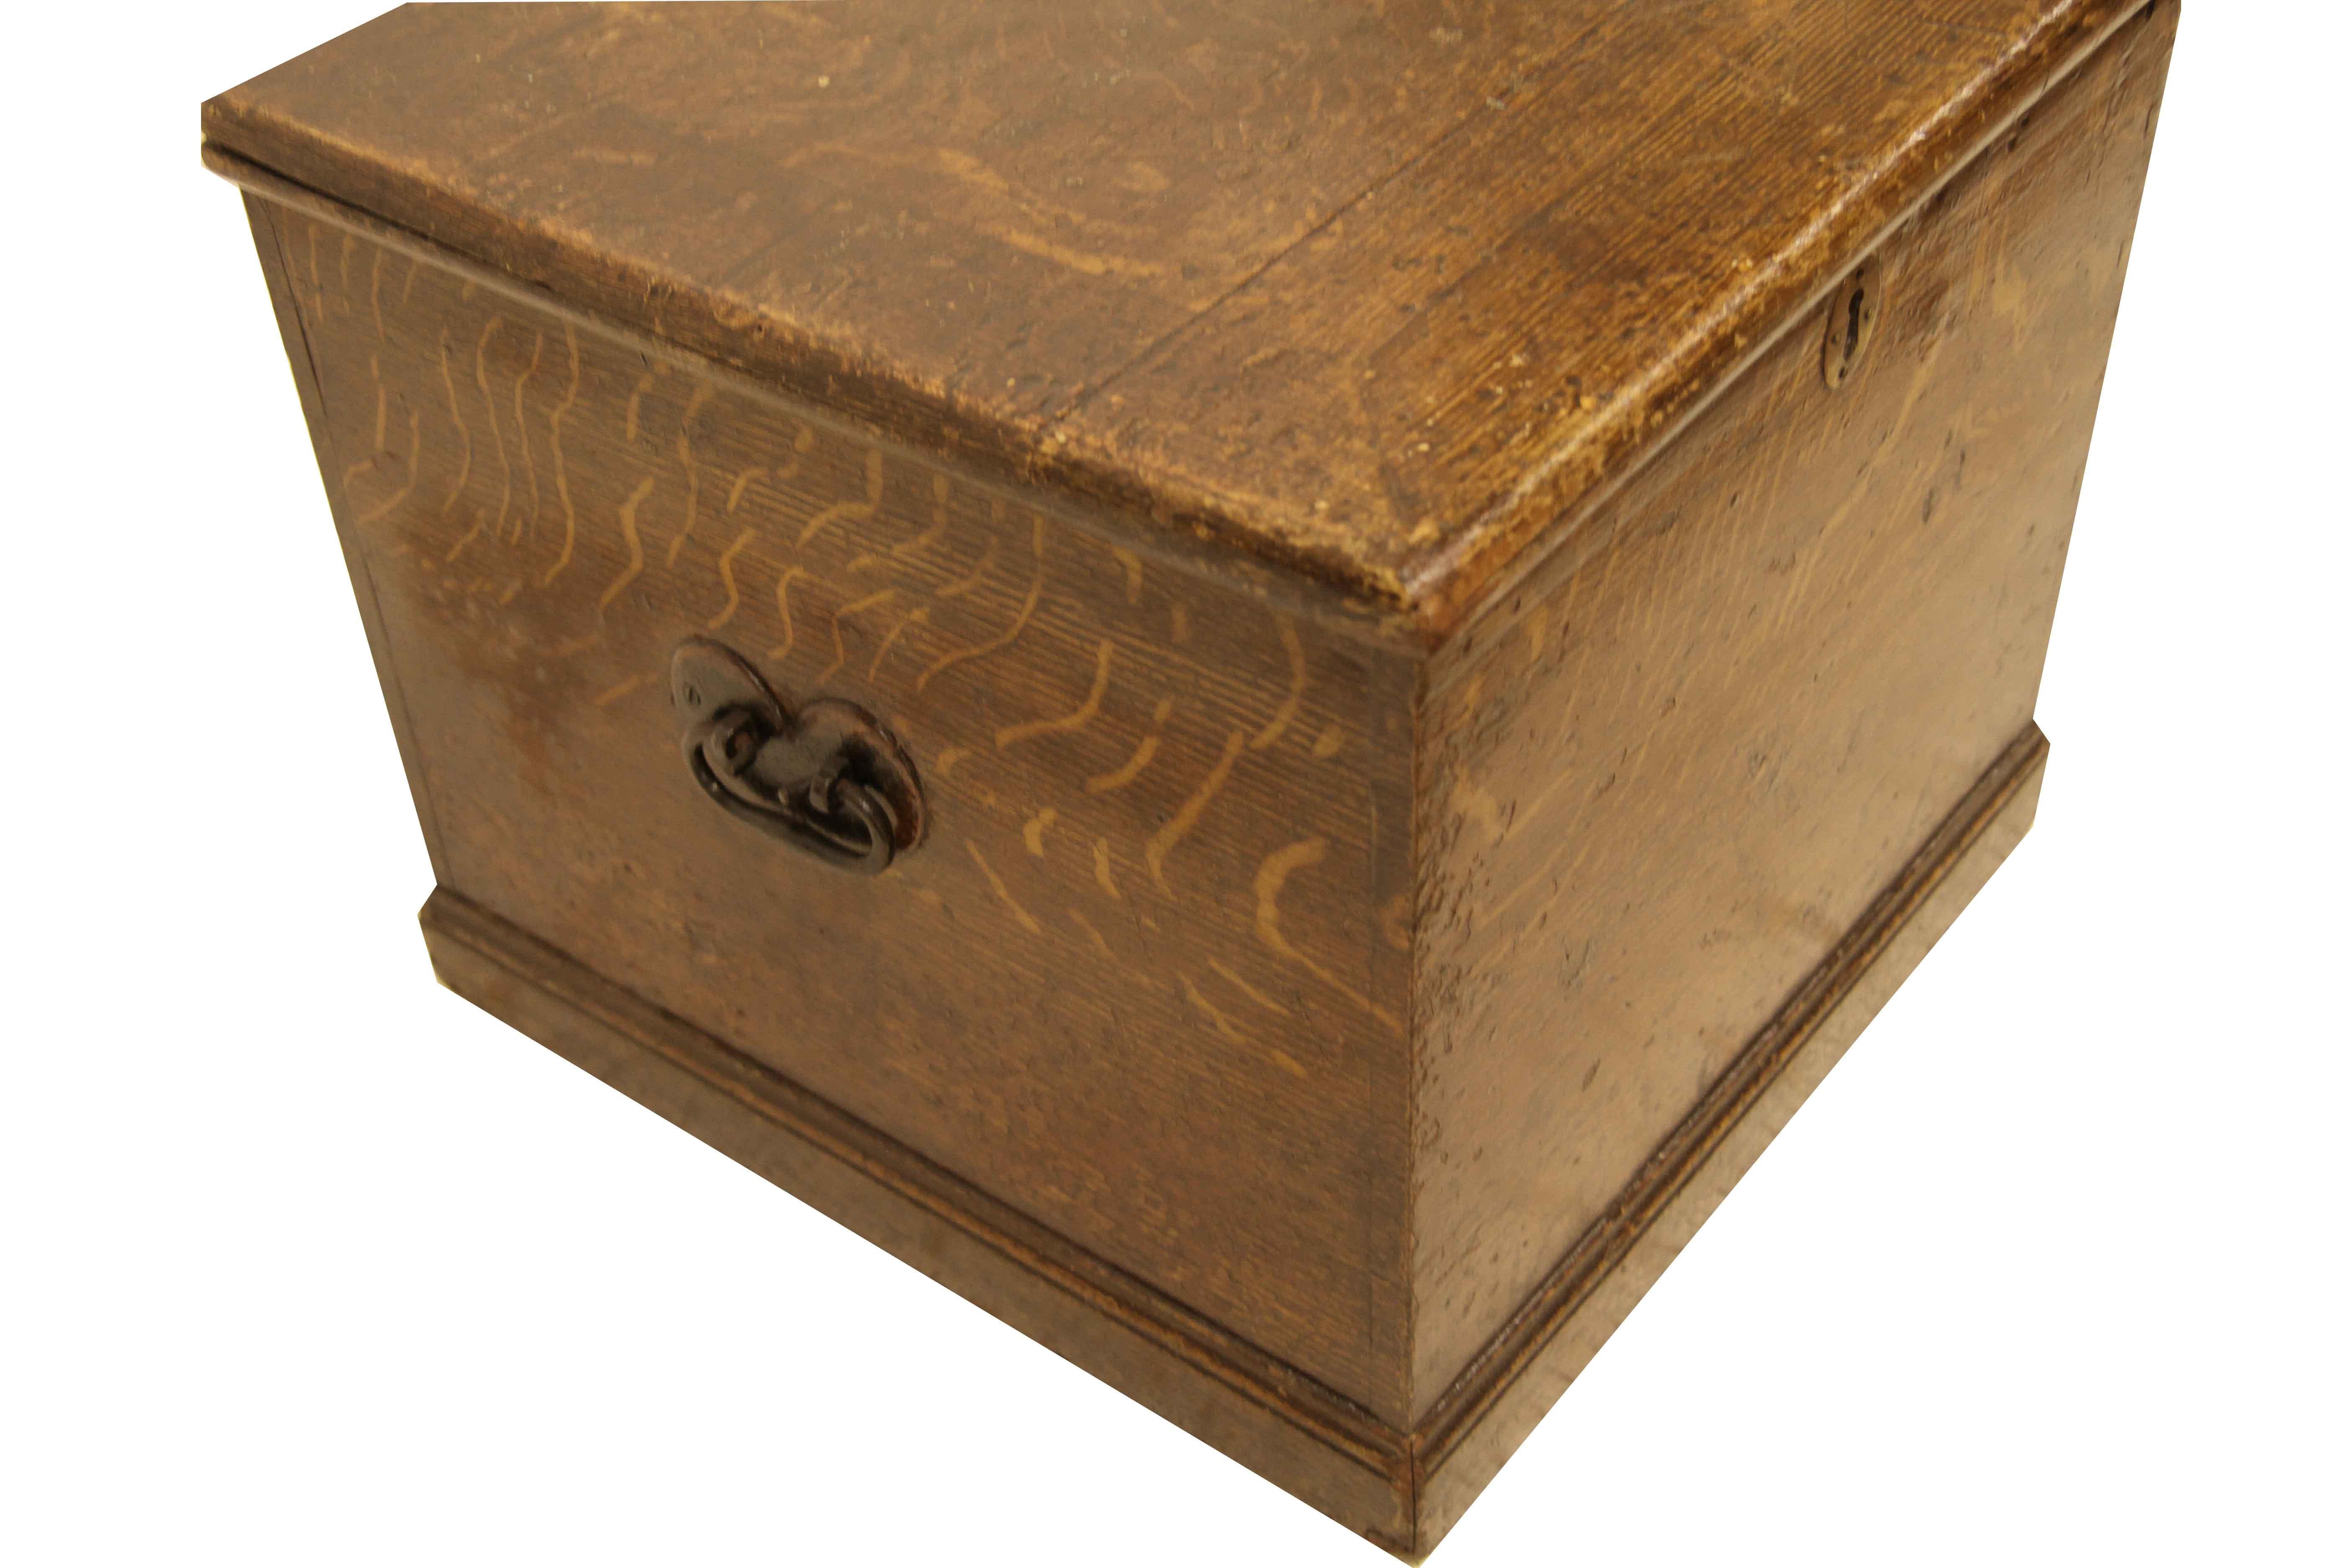 English grain painted box, this nearly square box is painted on all sides to simulate quarter sawn oak. It retains the original steel carrying handles on the sides. The interior and lid have been papered(can be removed on request); the top is